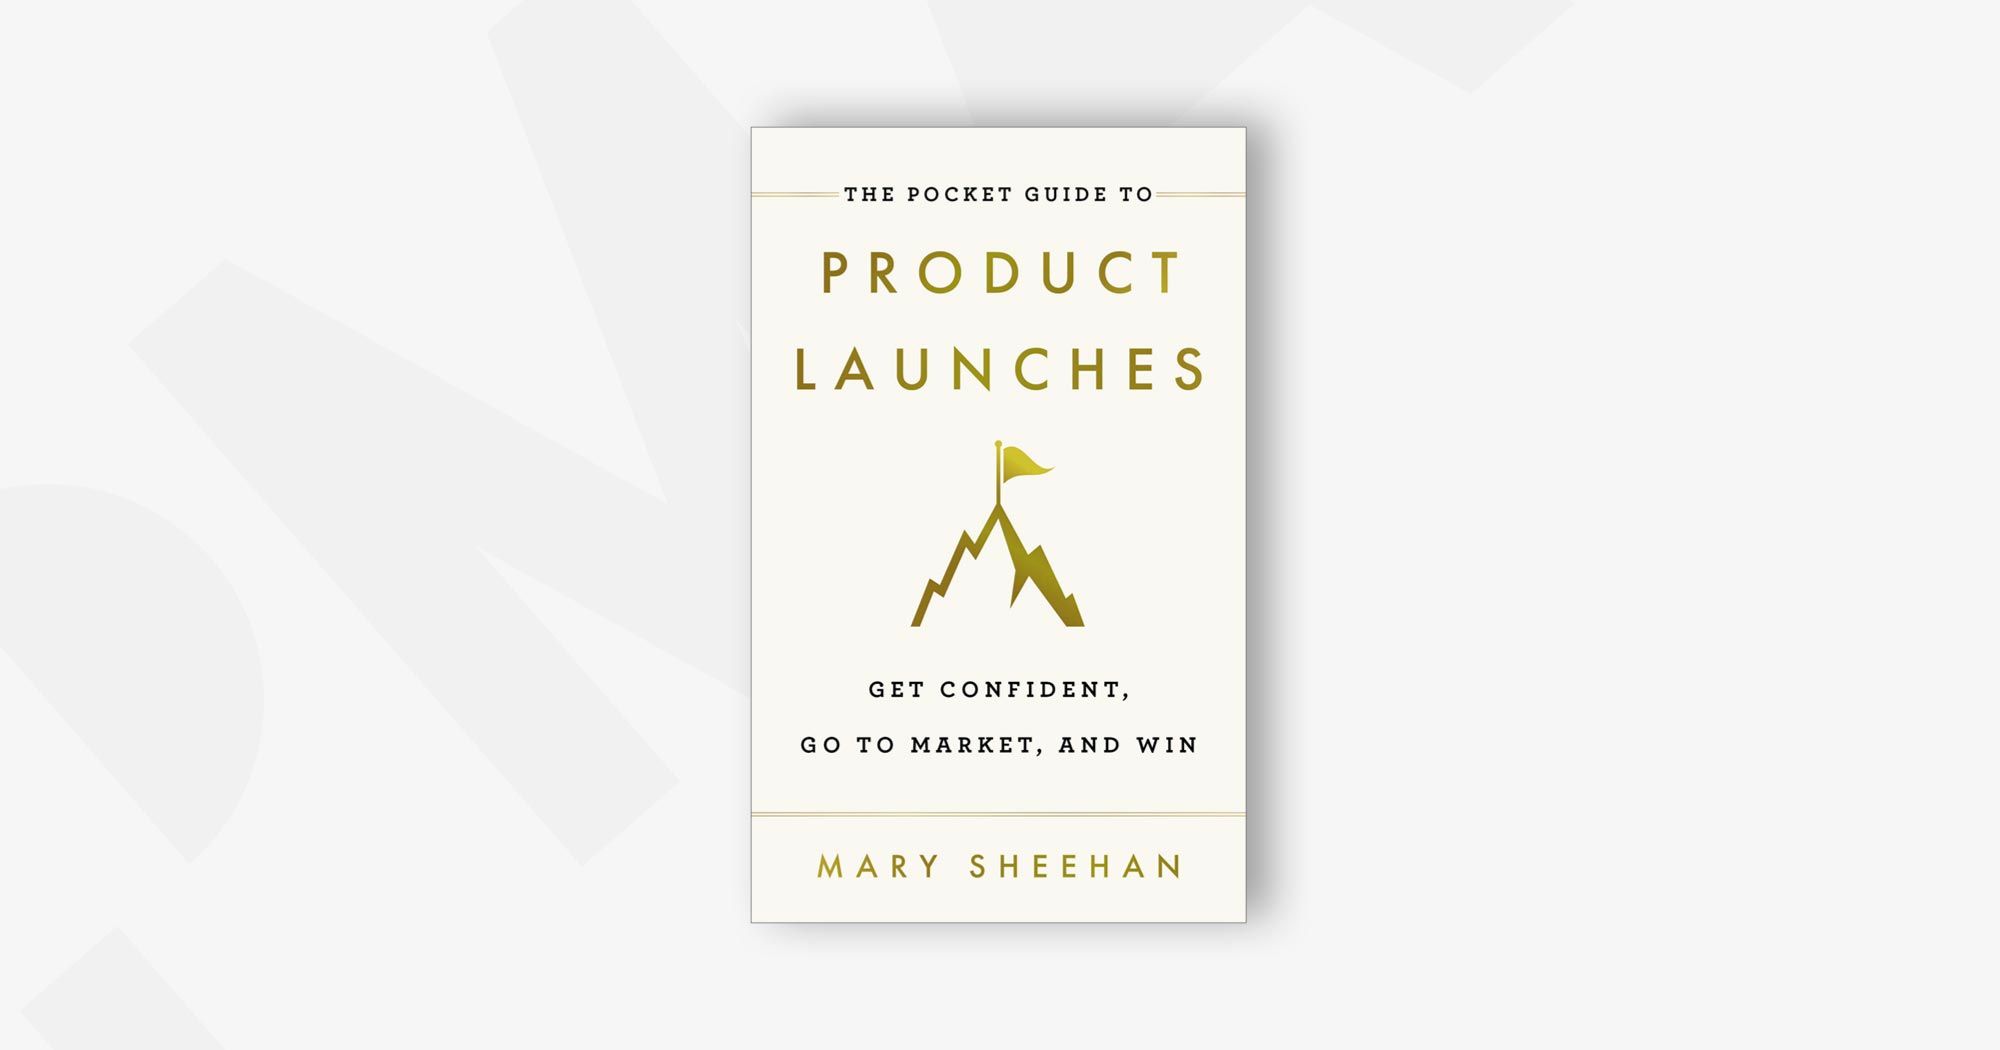 The Pocket Guide to Product Launches: Get Confident, Go to Market, and Win – Mary Sheehan